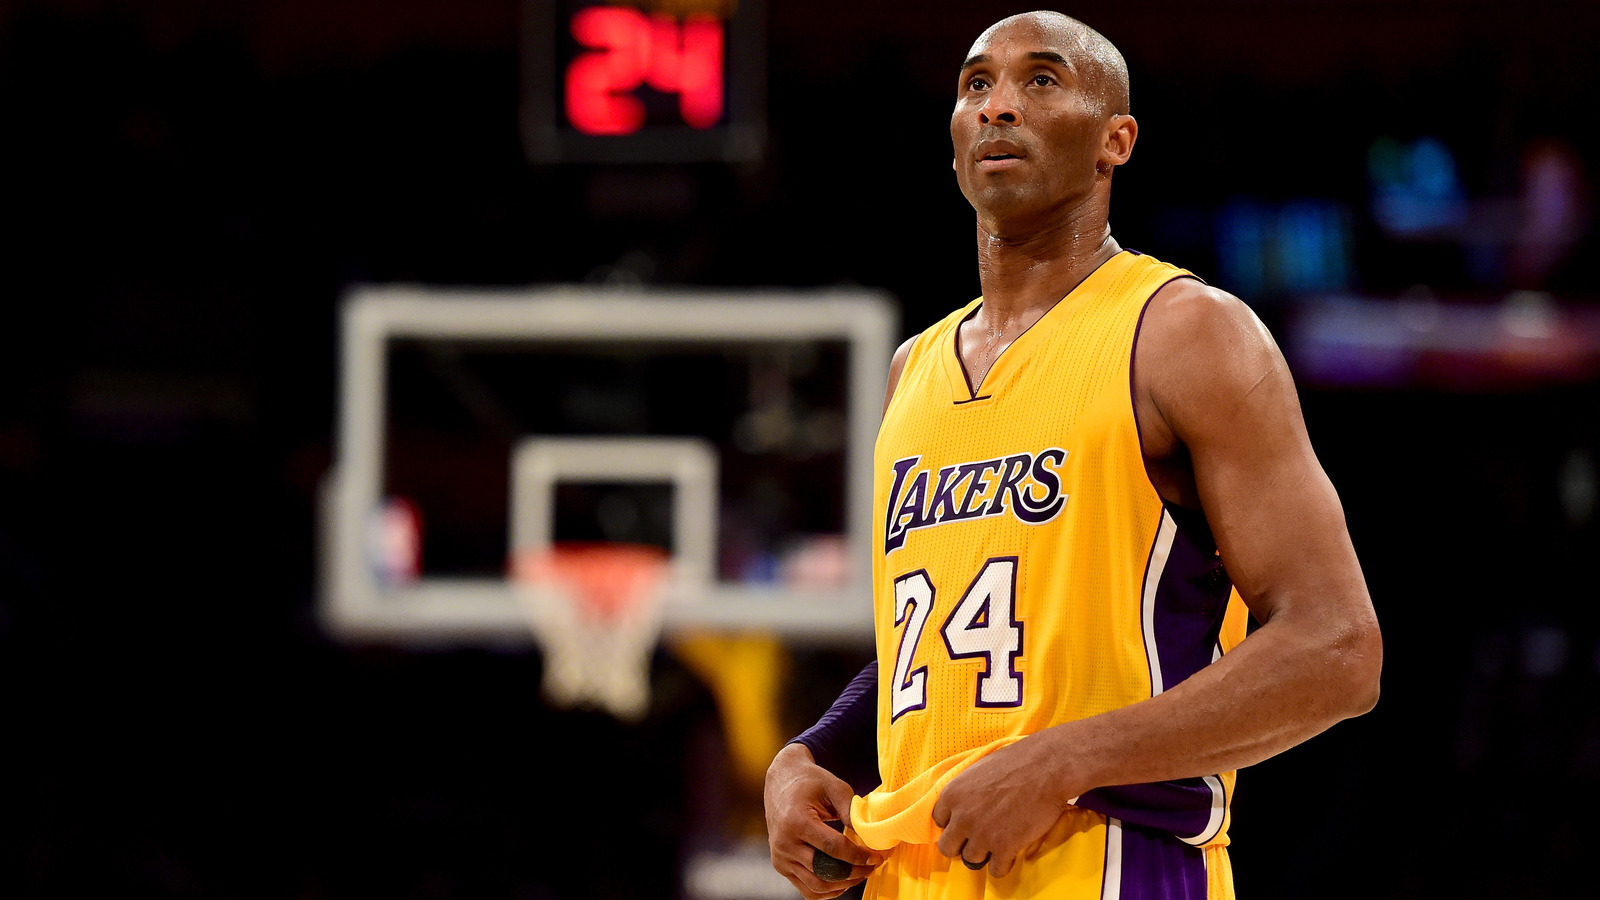 24 quintessential moments of Kobe Bryant's career